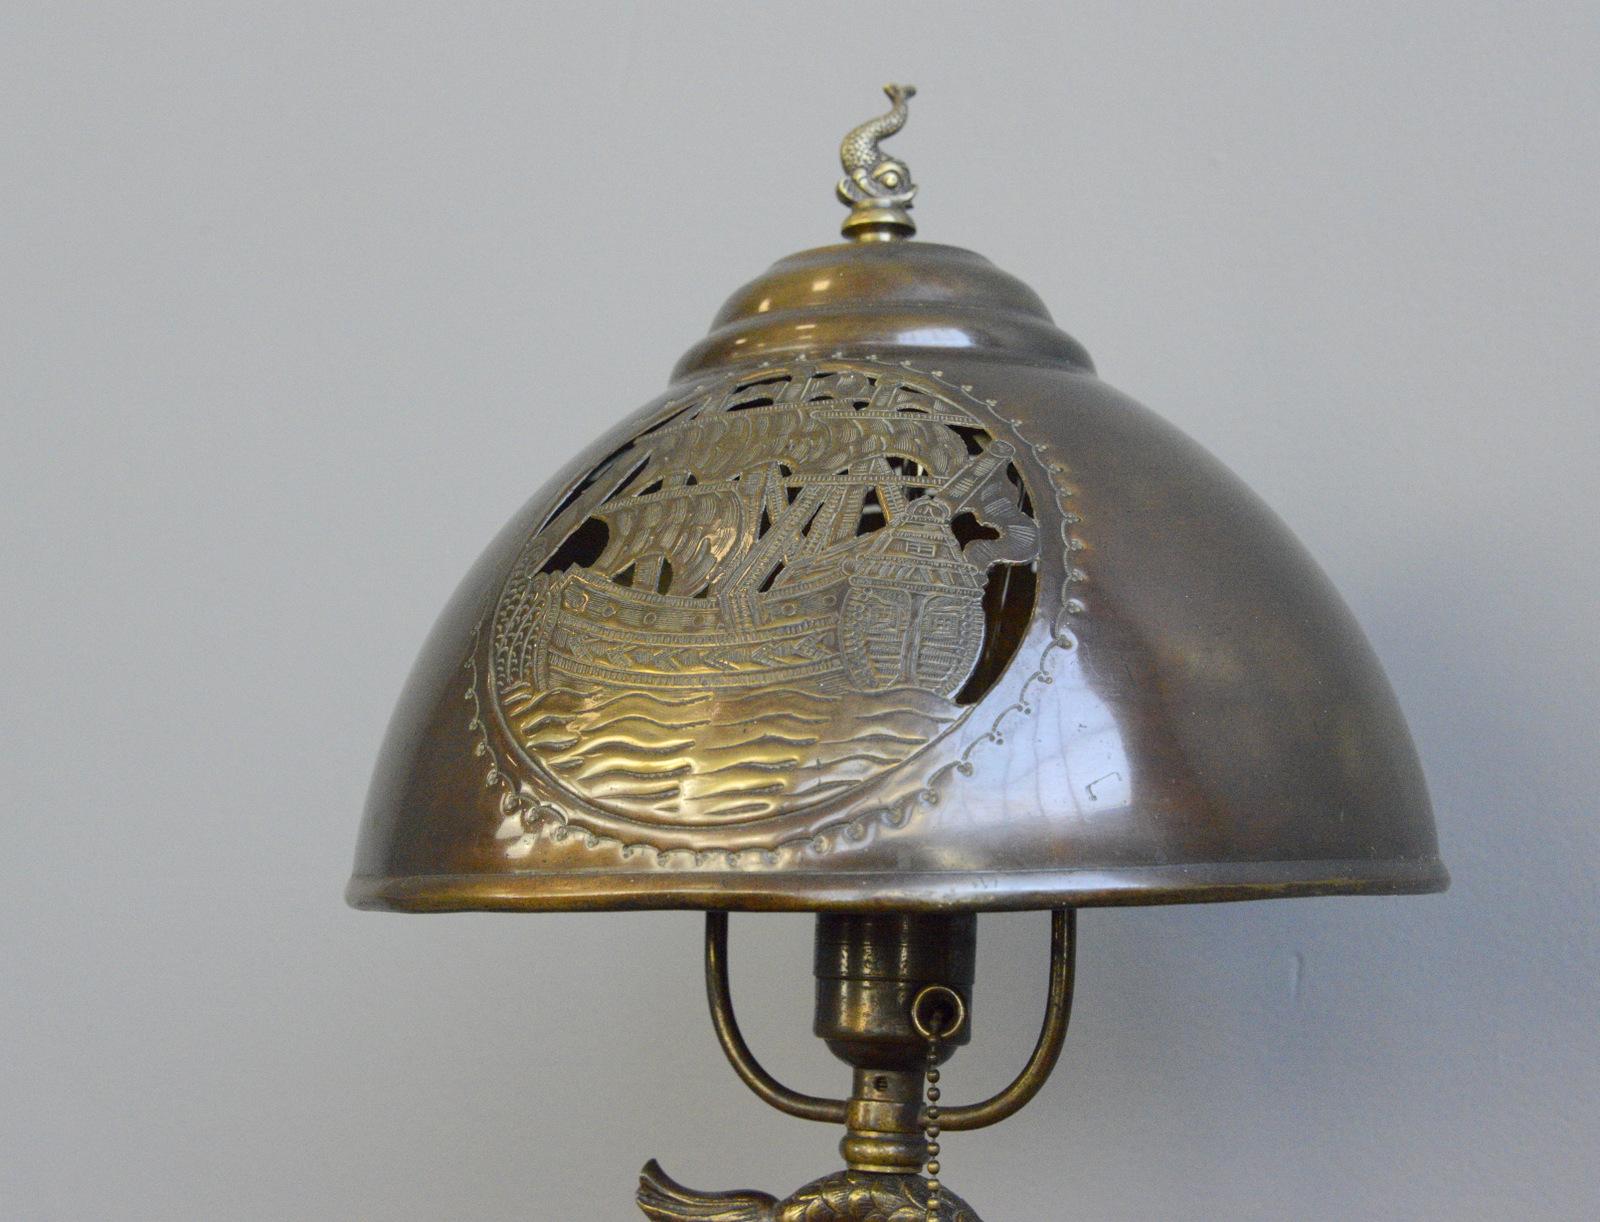 Arts & Crafts table lamp, circa 1890

- Engraved copper shade
- Solid brass fish shade topper
- Takes B22 fitting bulbs
- Original pull cord switch
- In the manner of The Birmingham Guild of Handicraft
- English, 1890
- Measures: 50cm tall x